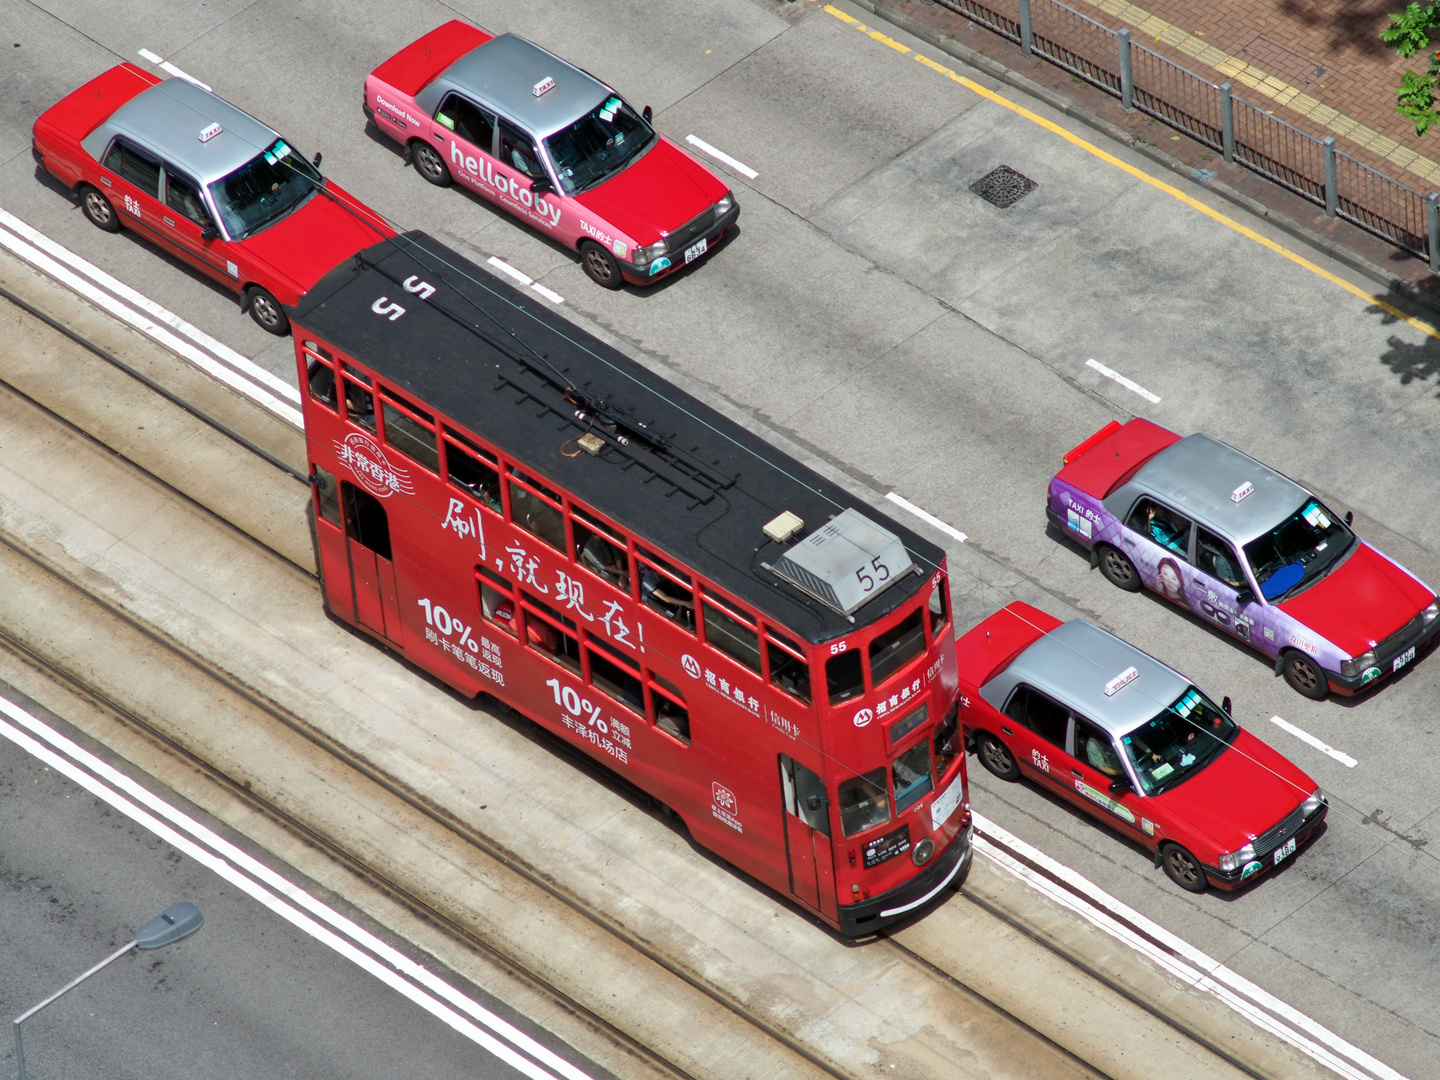 Four Taxis and a Tram